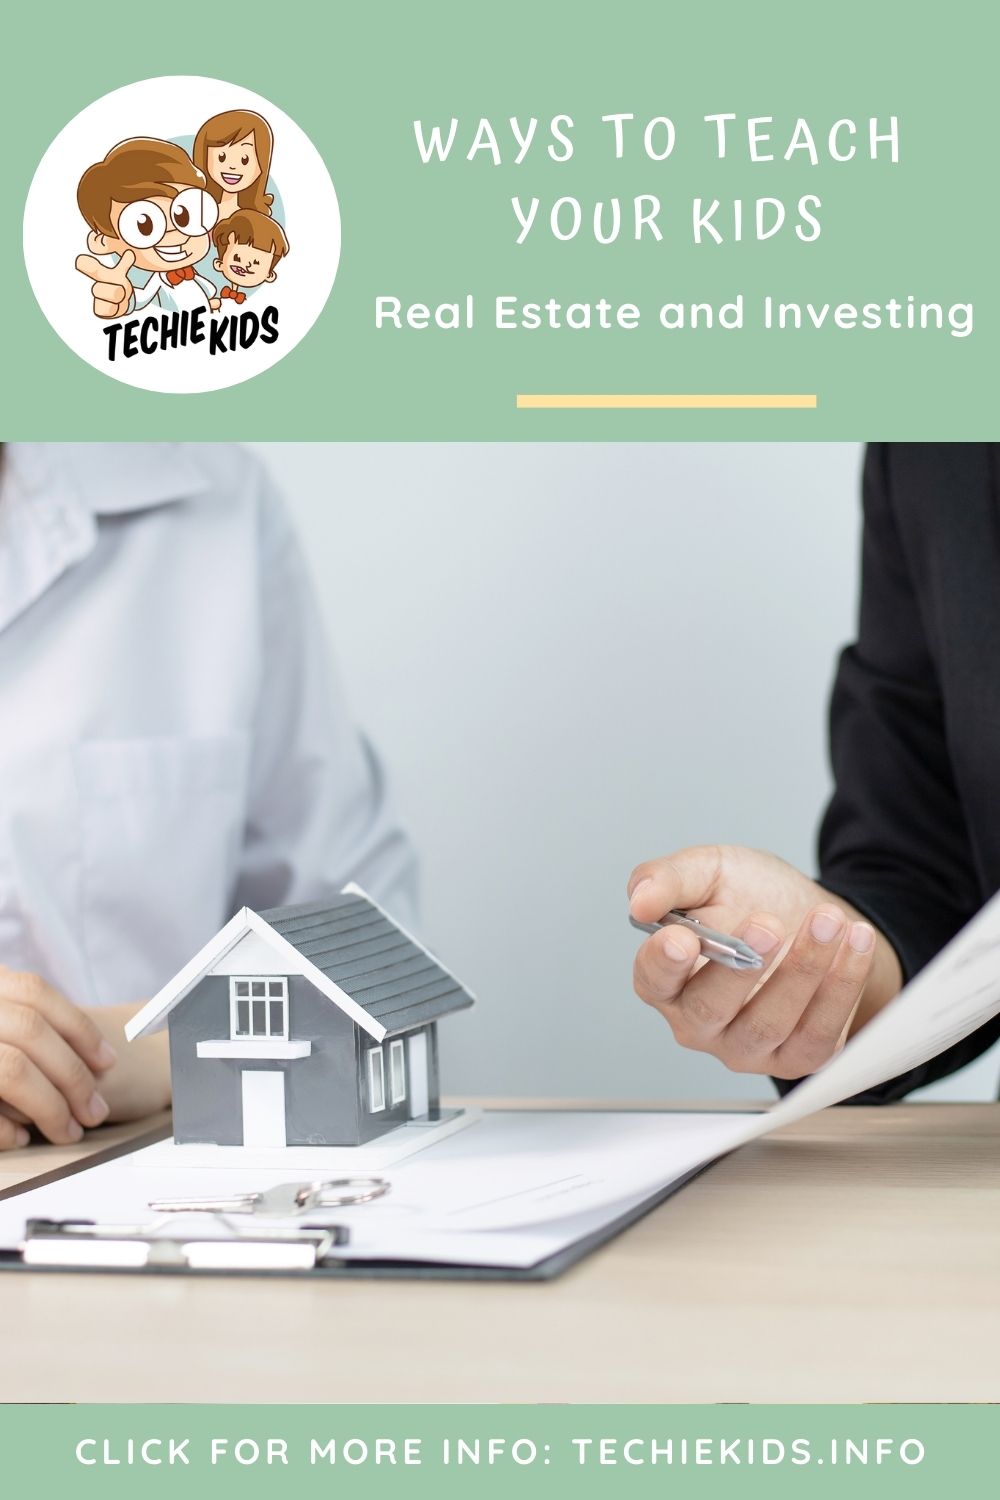 Ways to Teach Your Kids the Value of Real Estate and Investing